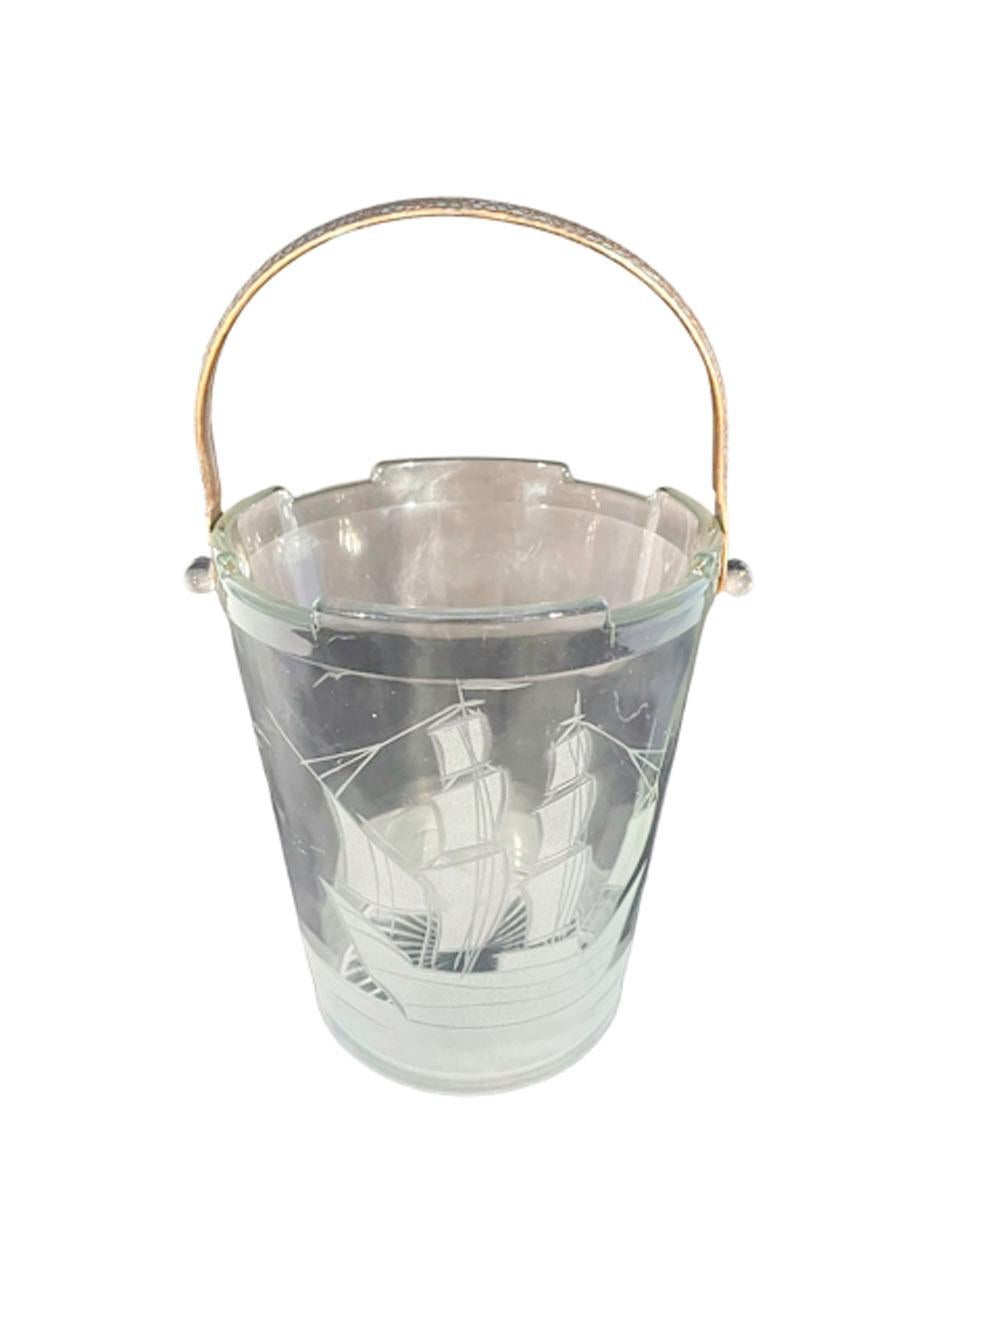 20th Century Art Deco Clear Glass Ice Bucket with Etched Sailing Ship Design and Metal Handle For Sale